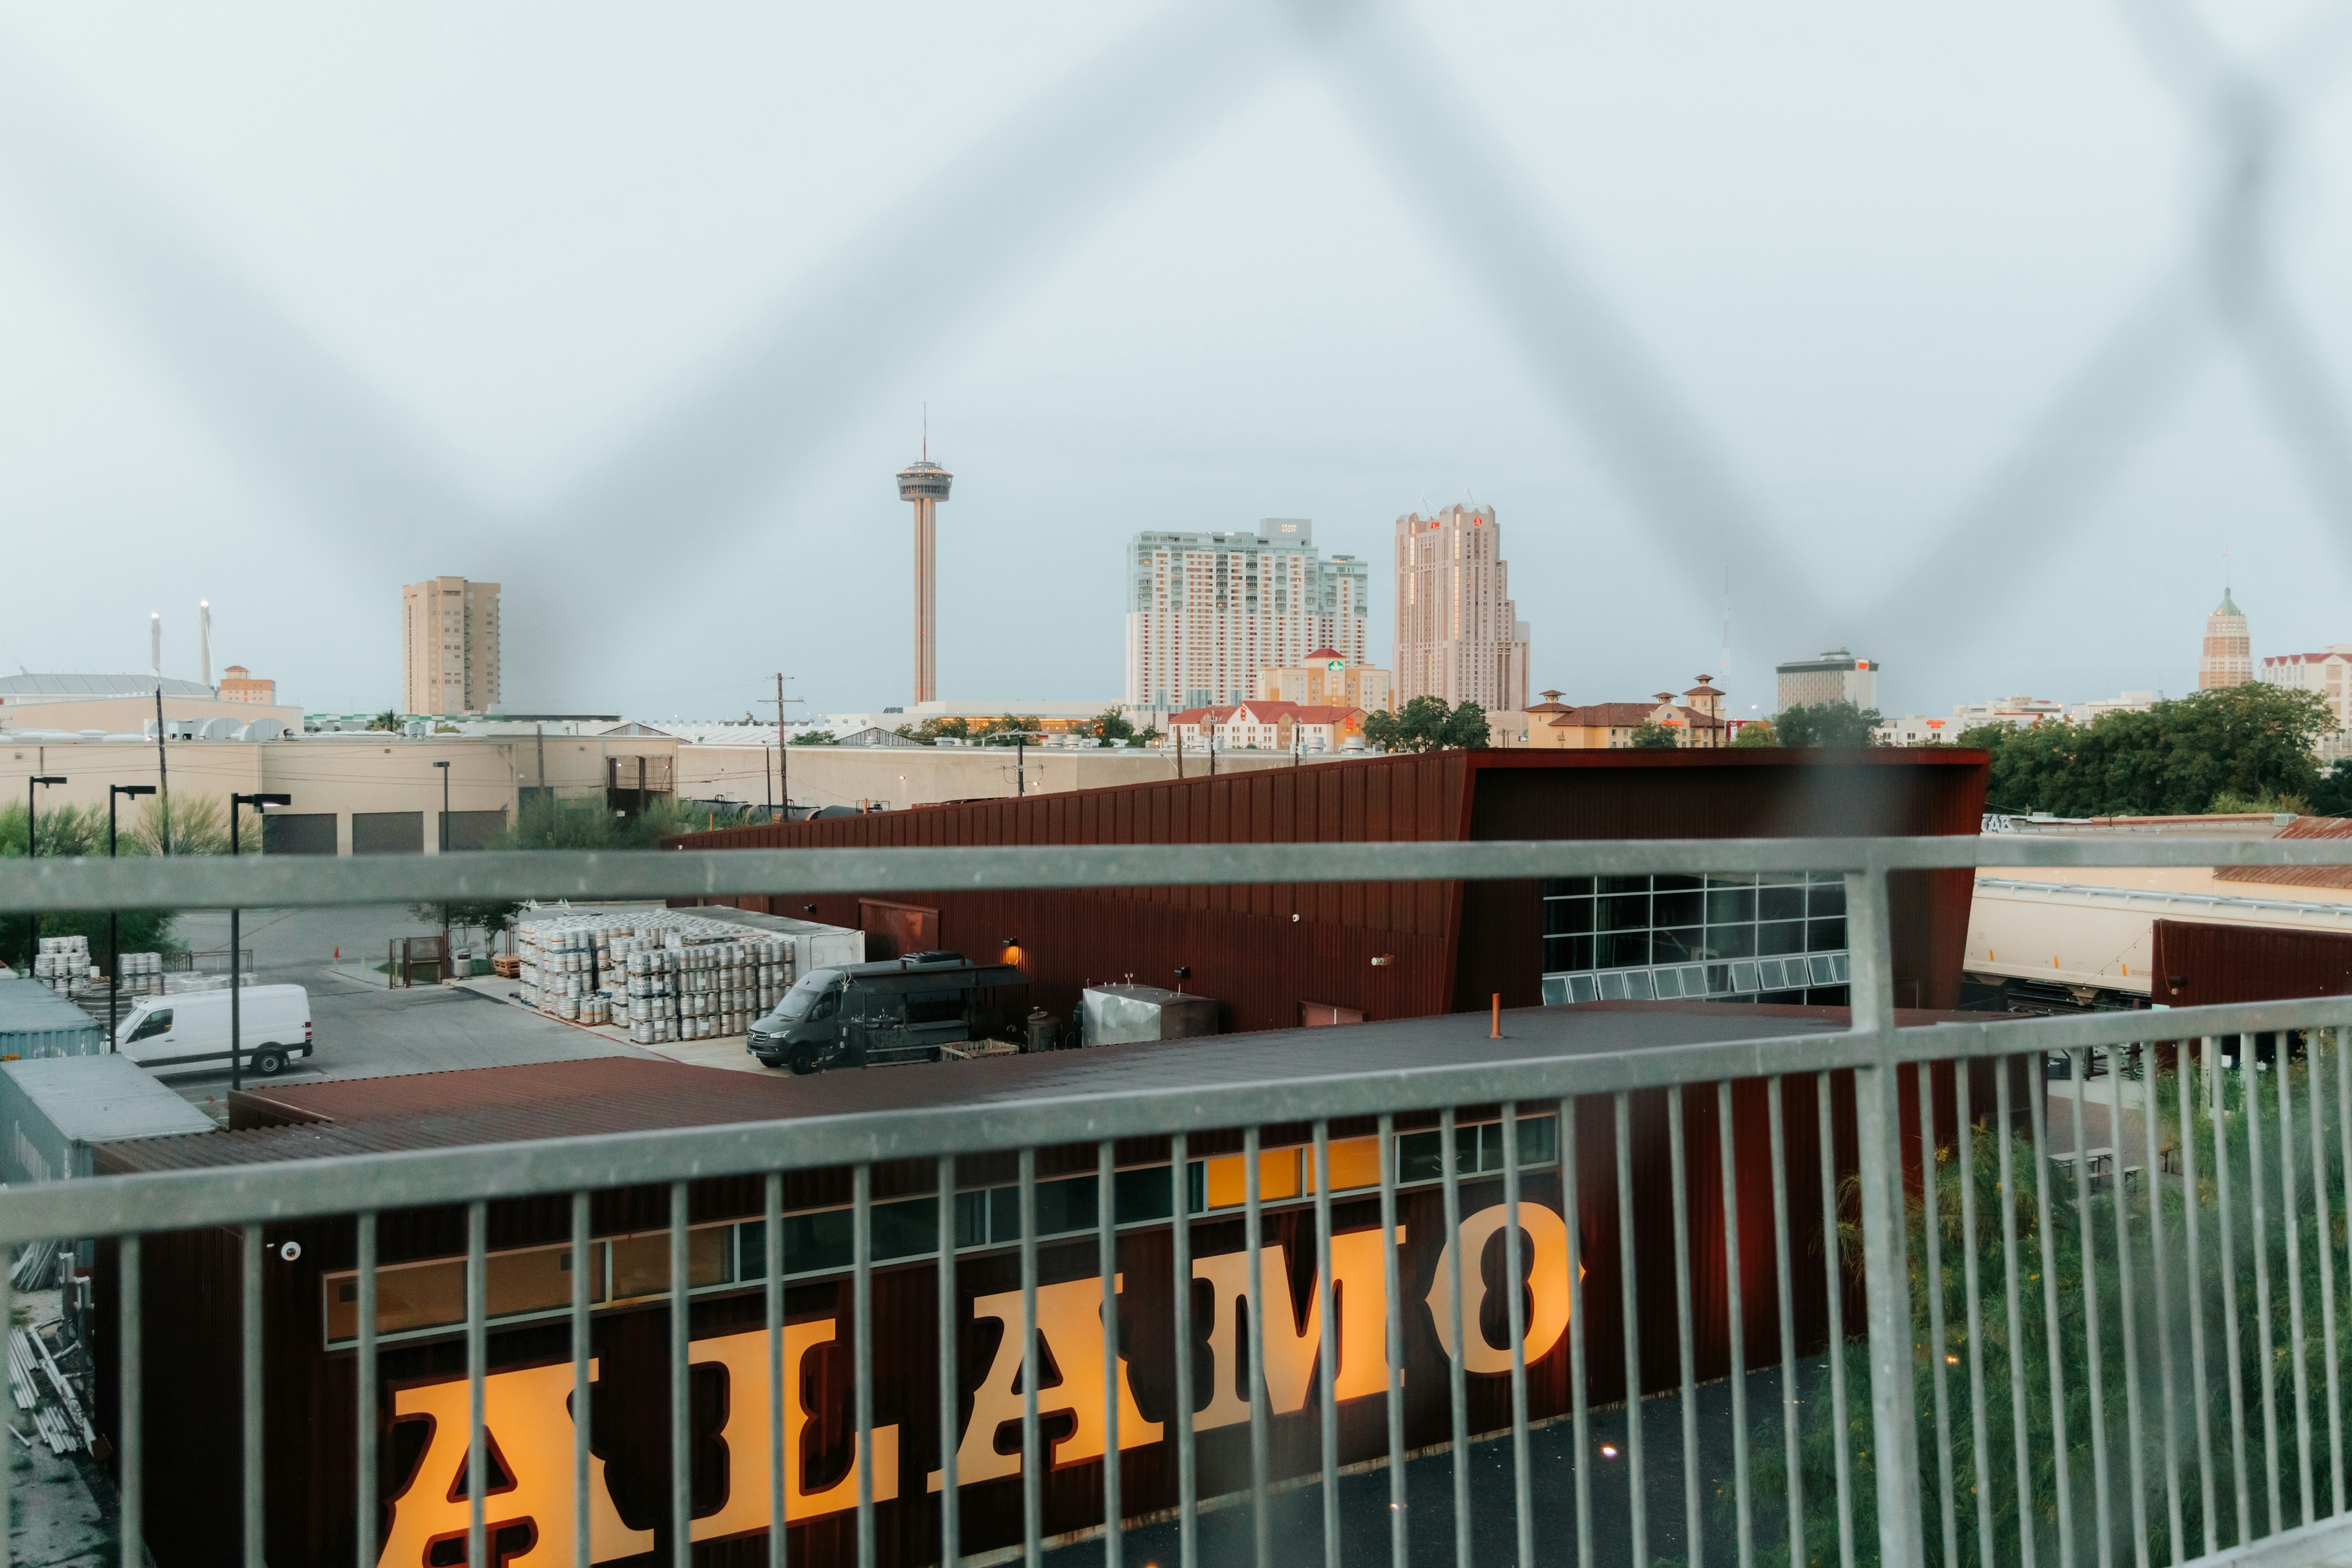 This is photo I took of my hometown, San Antonio, Texas. This was taken at golden hour. It is a beautiful skyline of our tower and well known hotels both Hyatt and Marriott. There was a construction fence that I wanted to get nice and blurry. The Alamo is in San Antonio, Texas.